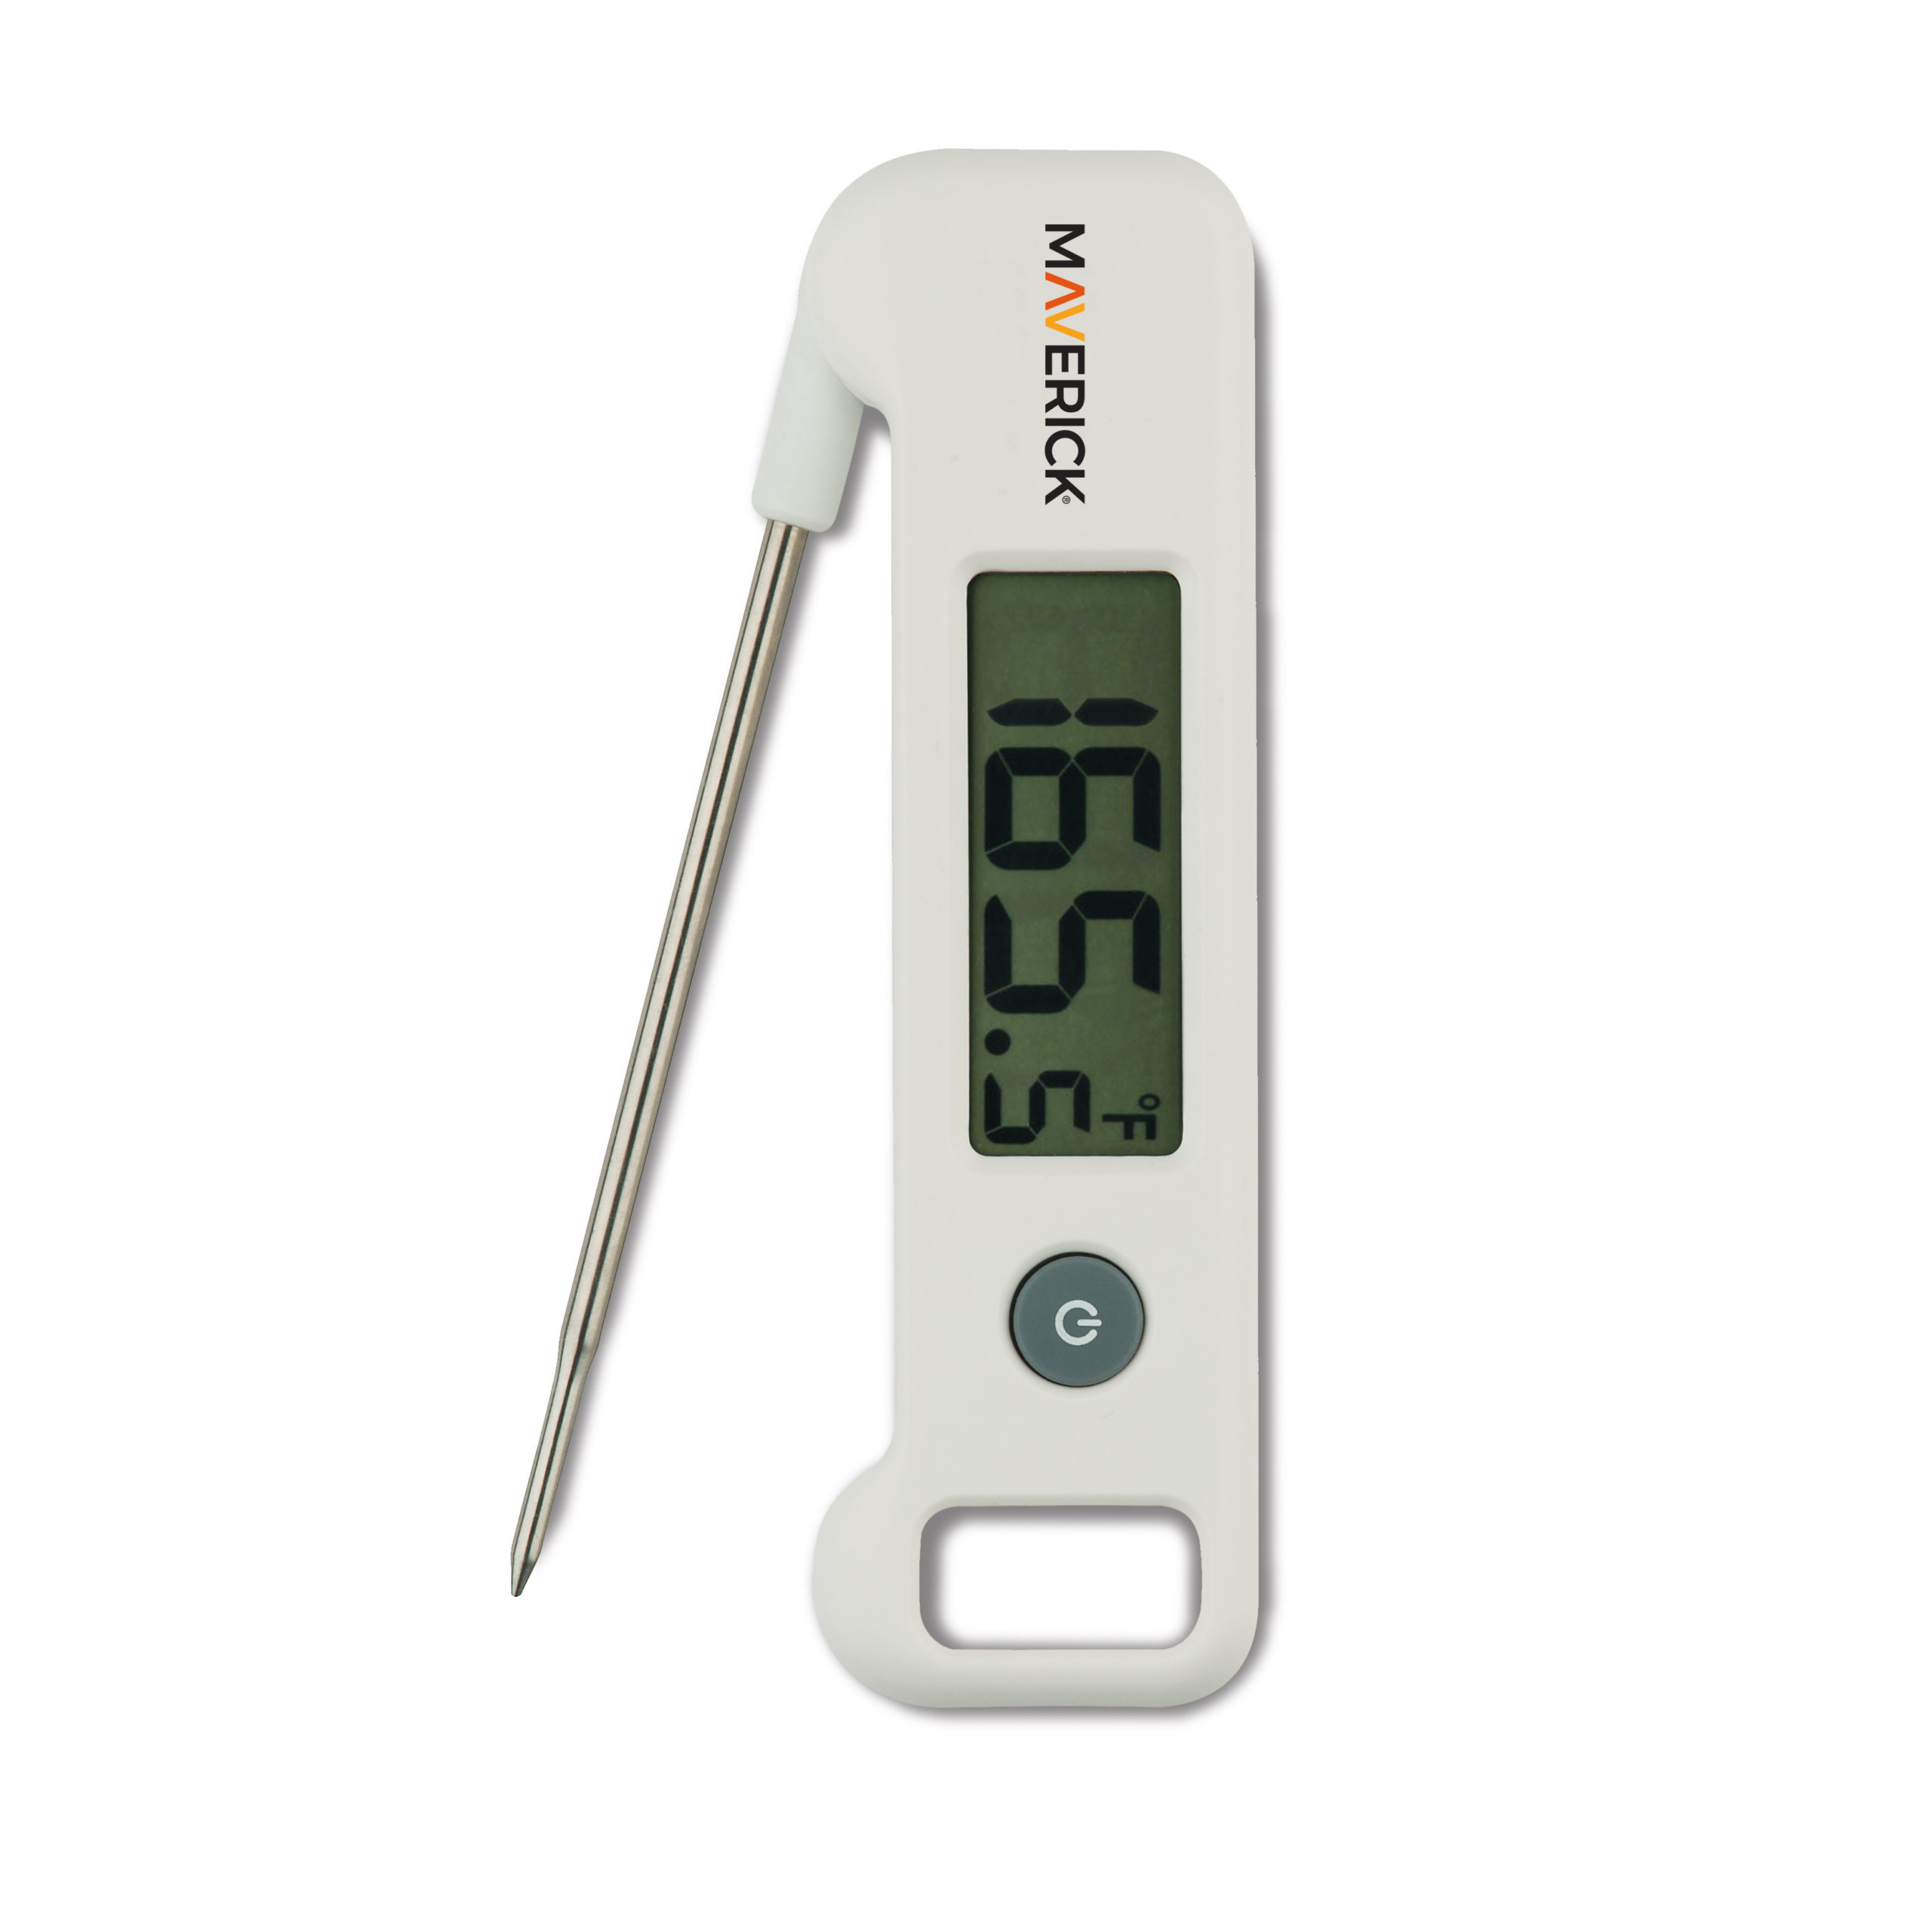 DT-05 Digital Probe Thermometer